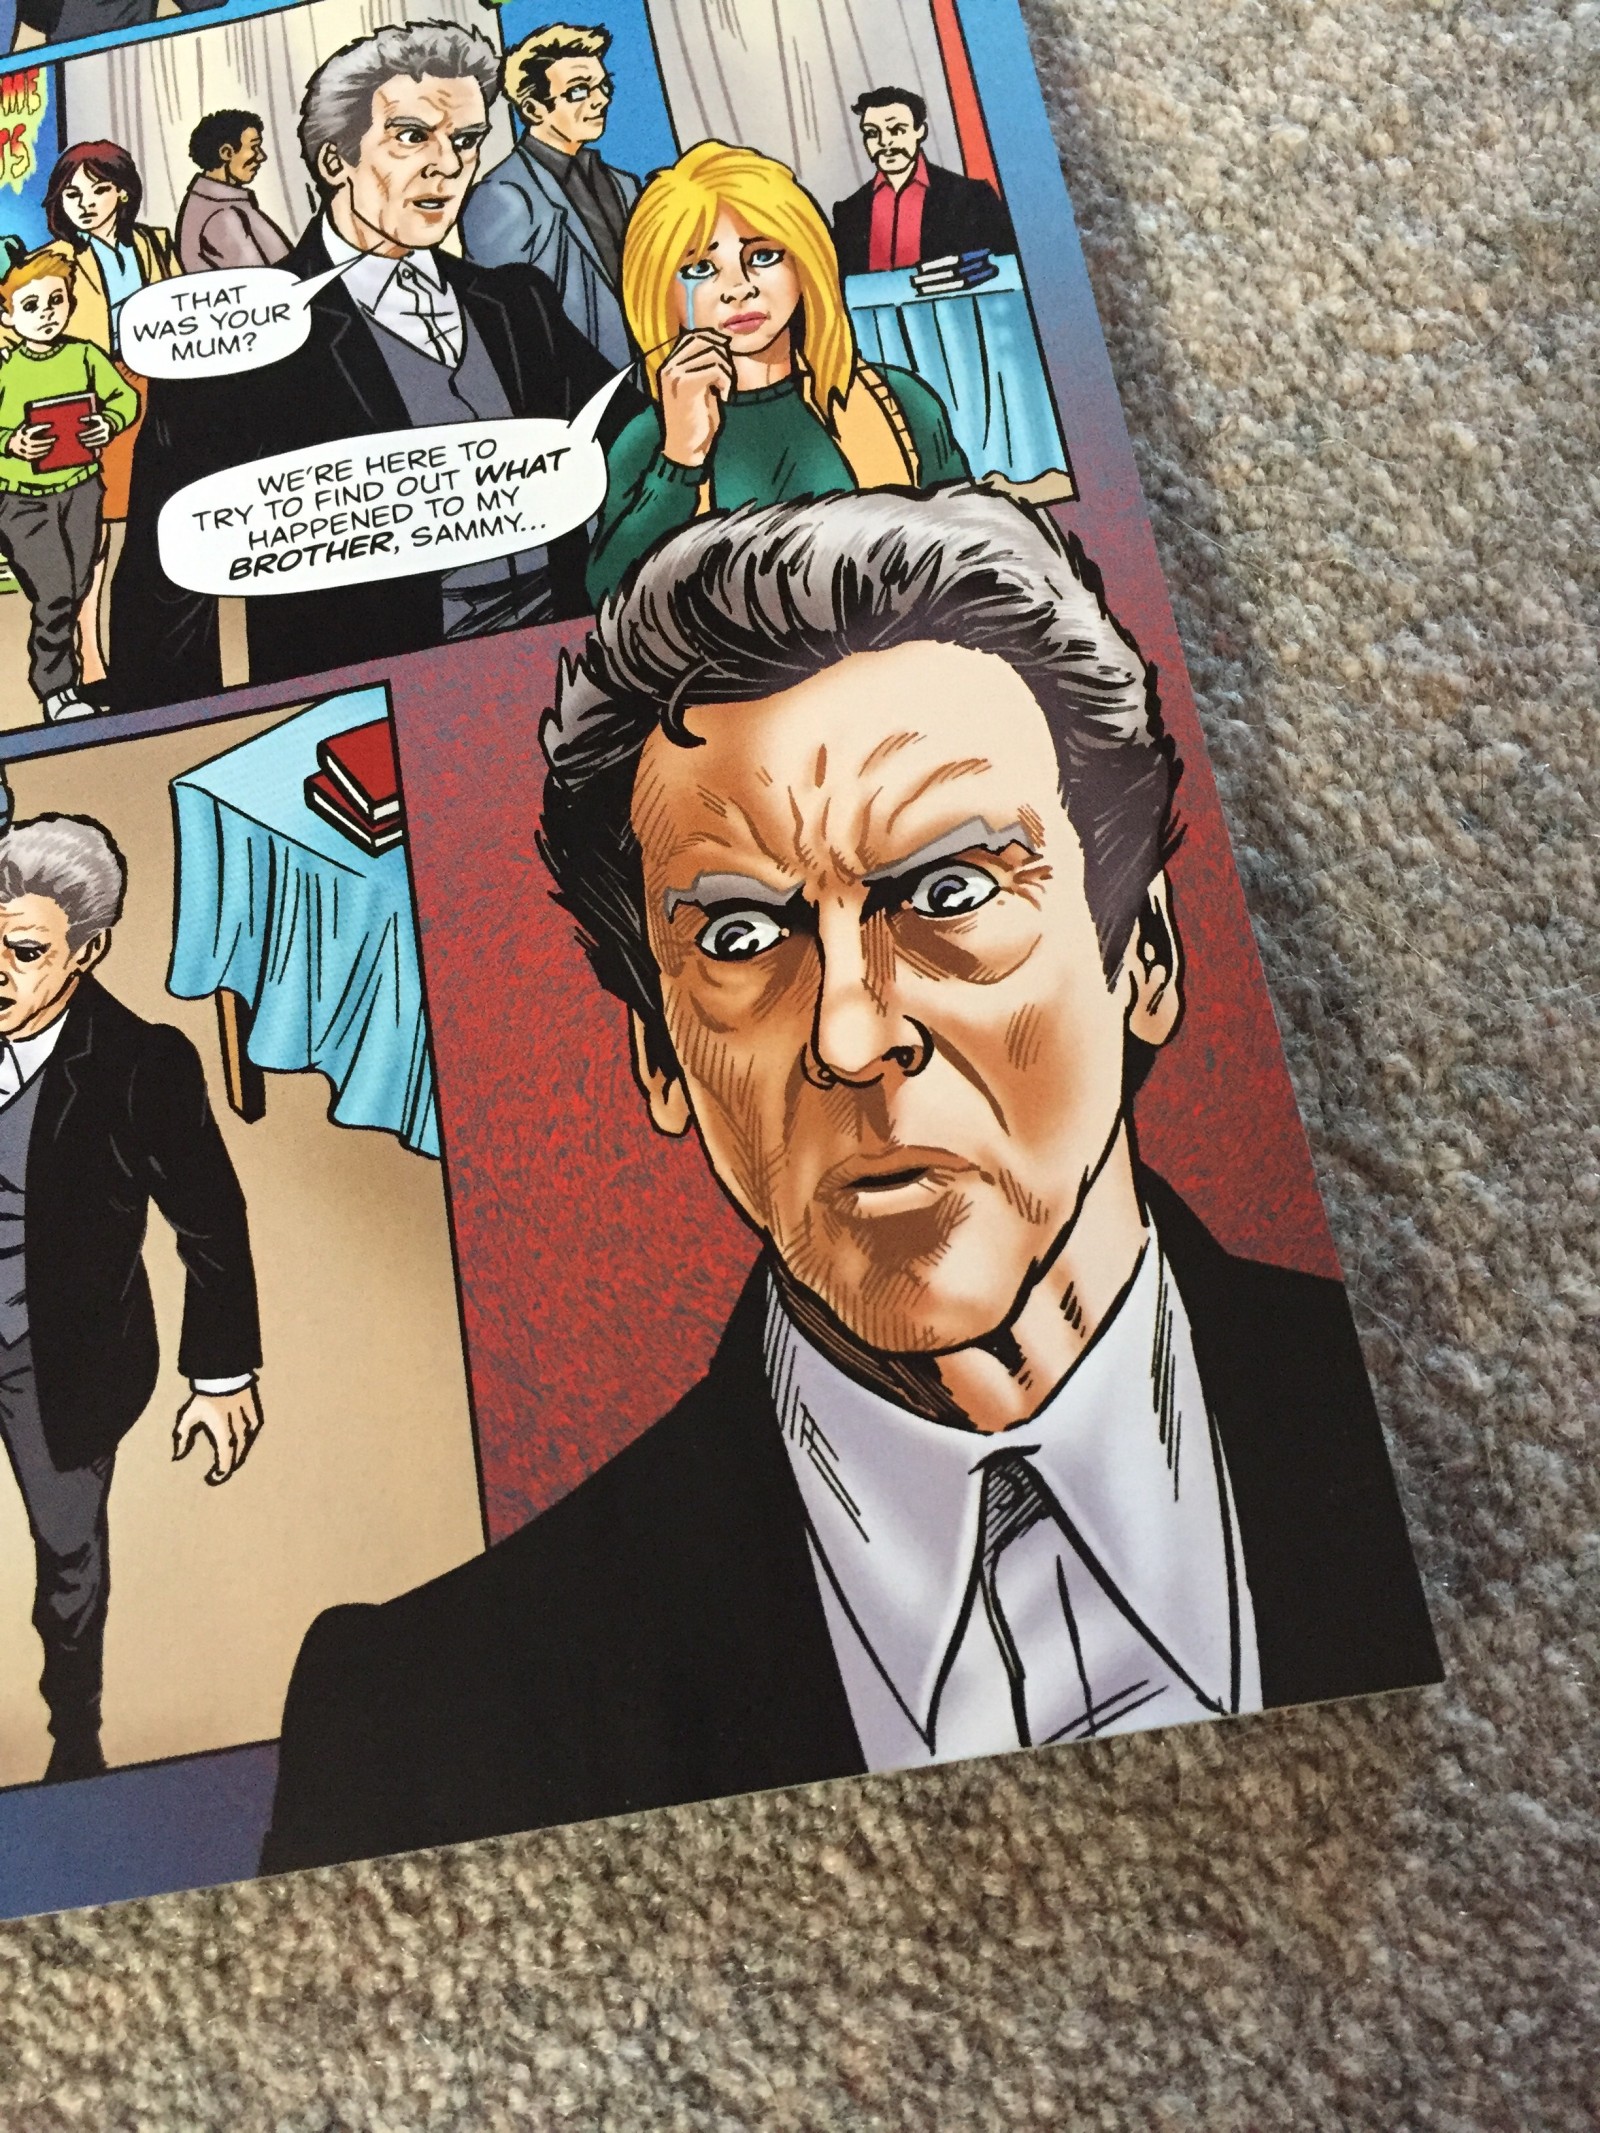 Doctor Who Adventures #13 - "Shock Horror" Detail